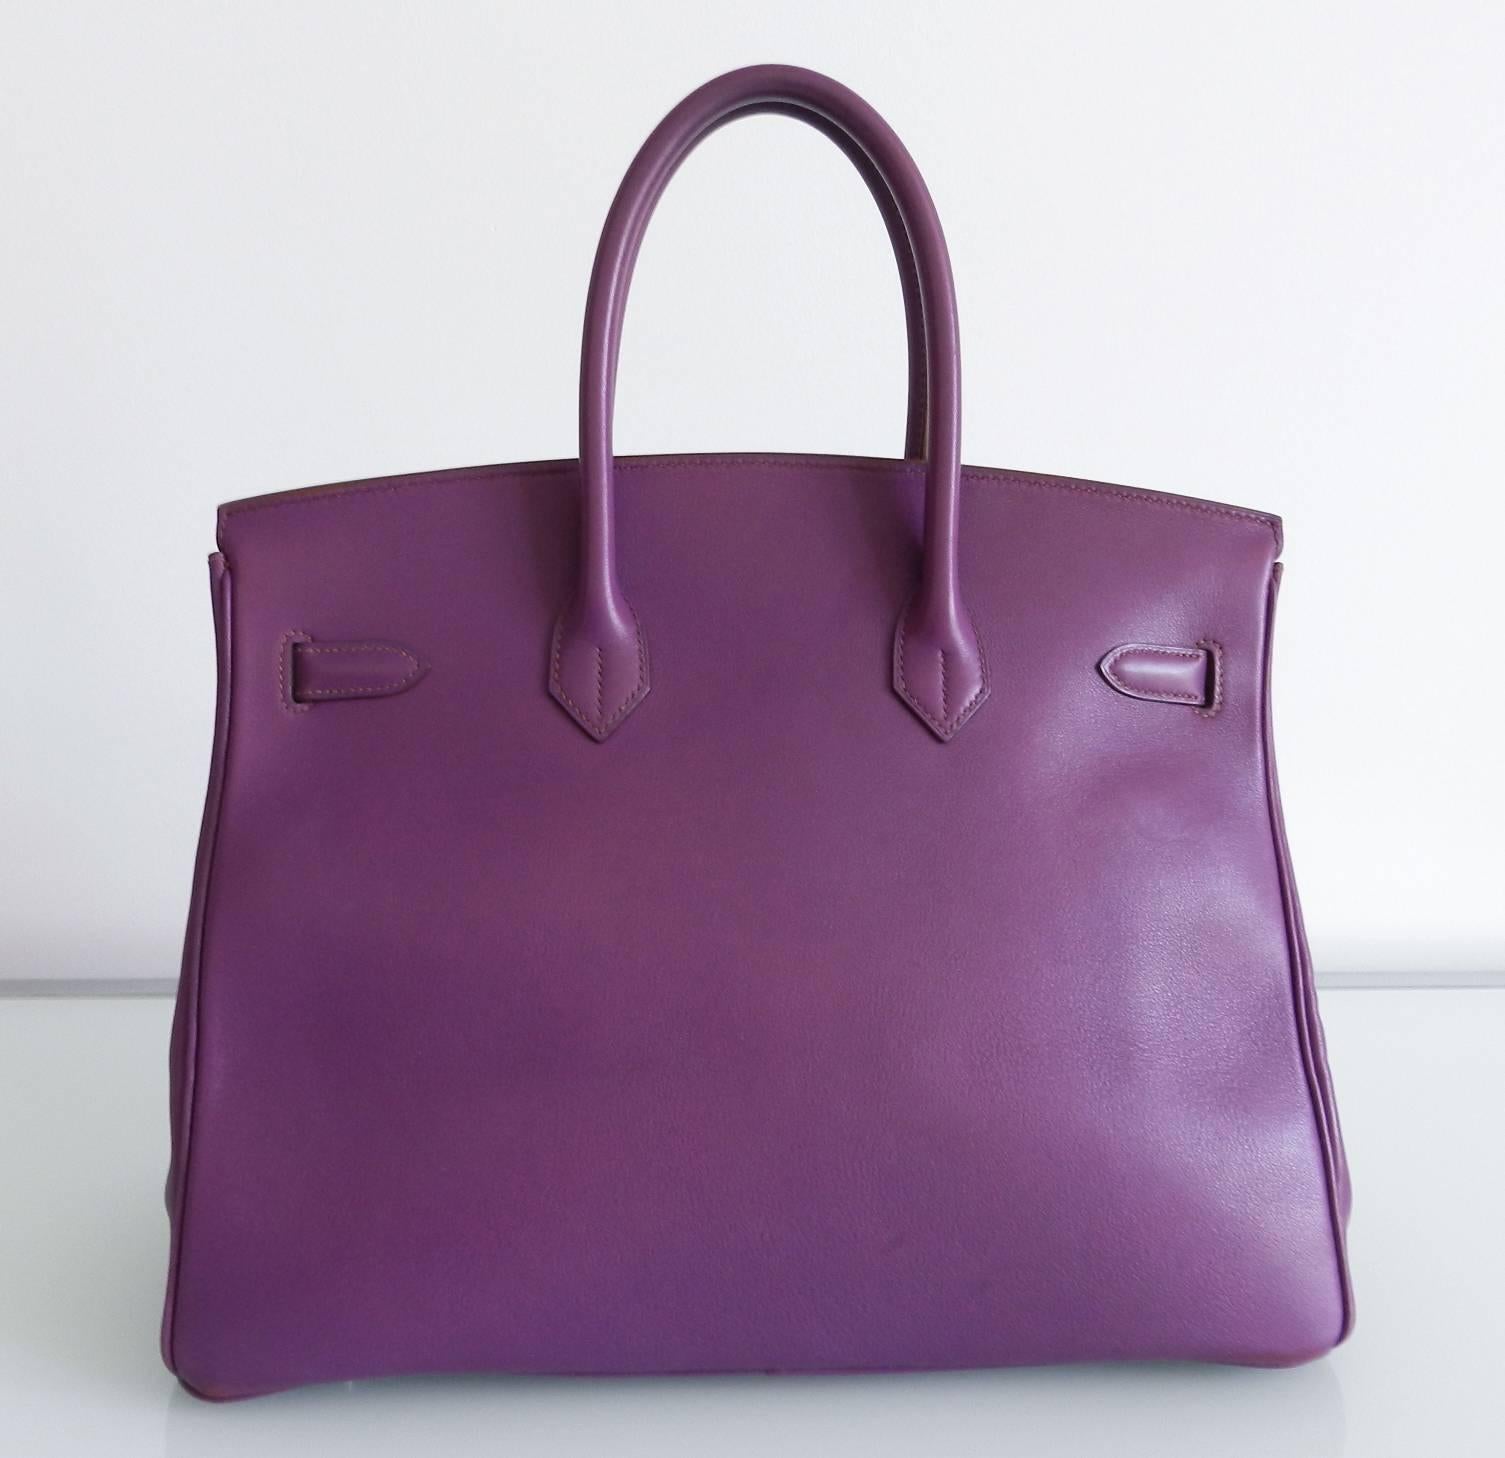 Hermes "ultraviolet" purple birkin 35cm in swift leather and palladium hardware. Date stamp E in square for year 2001.  Excellent pre-owned condition. The smooth swift leather has been refurbished at Hermes Paris. Includes duster,